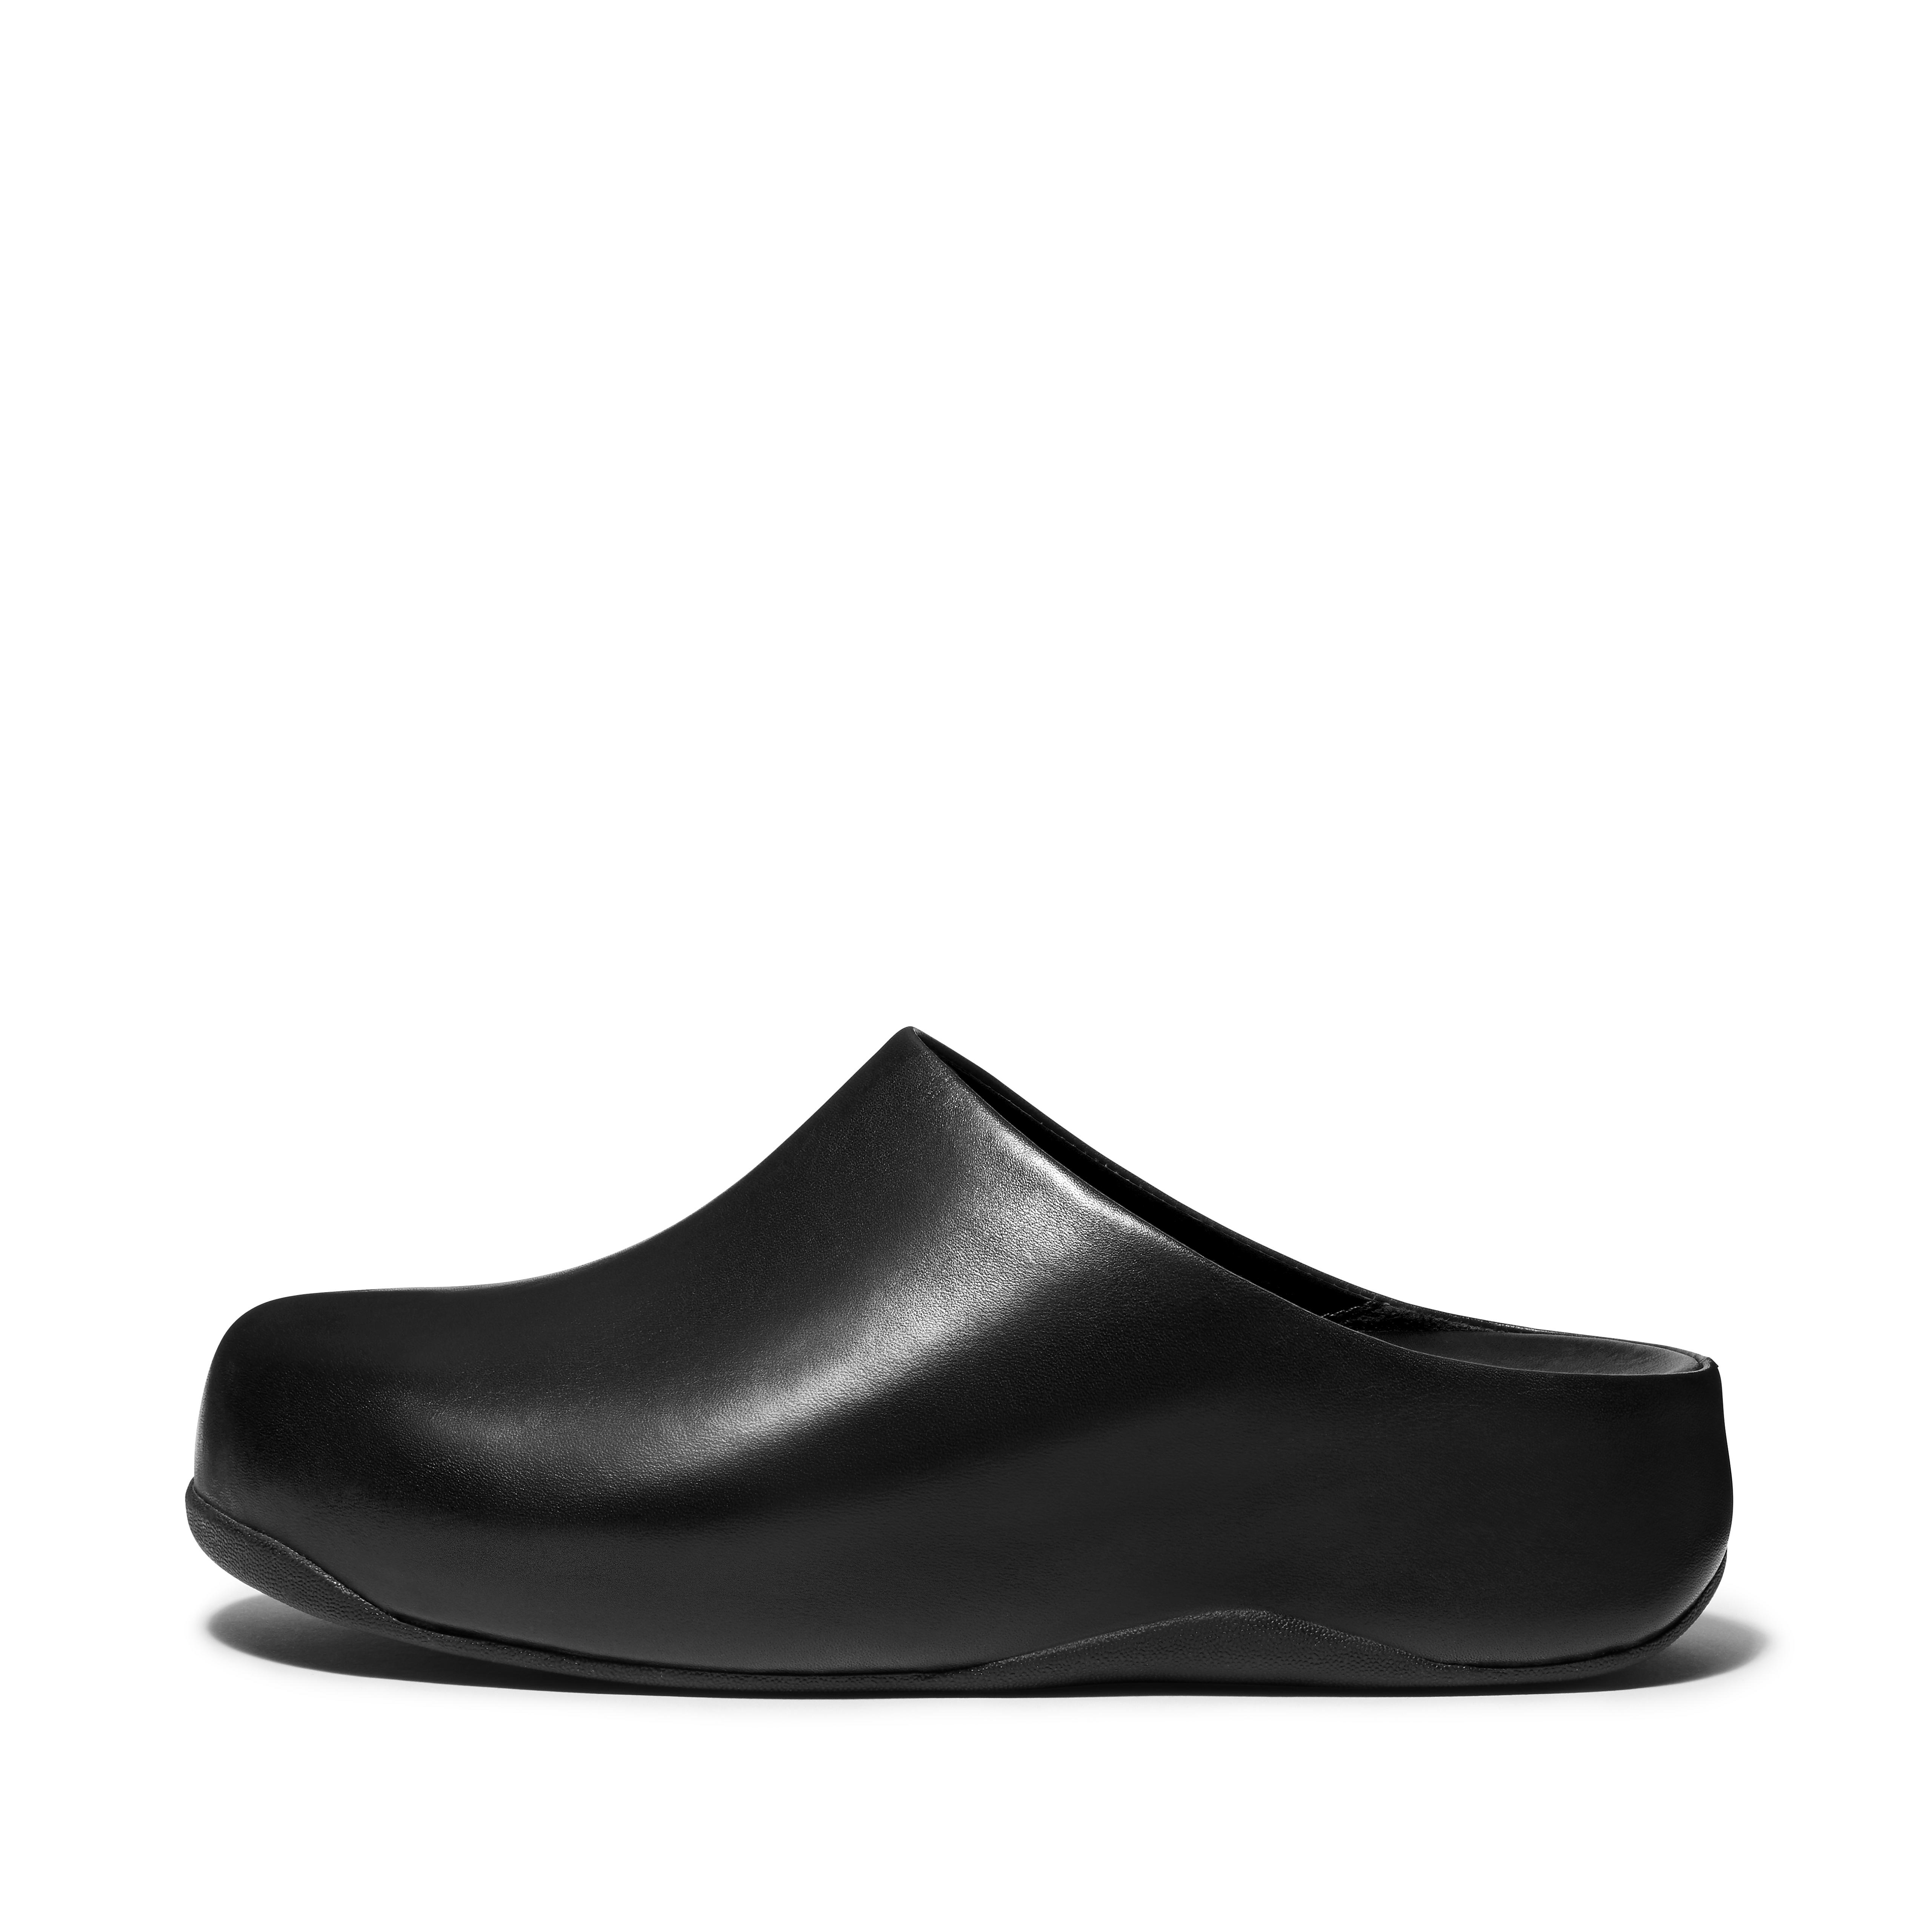 Fitflop Women's Shuv Leather Clogs